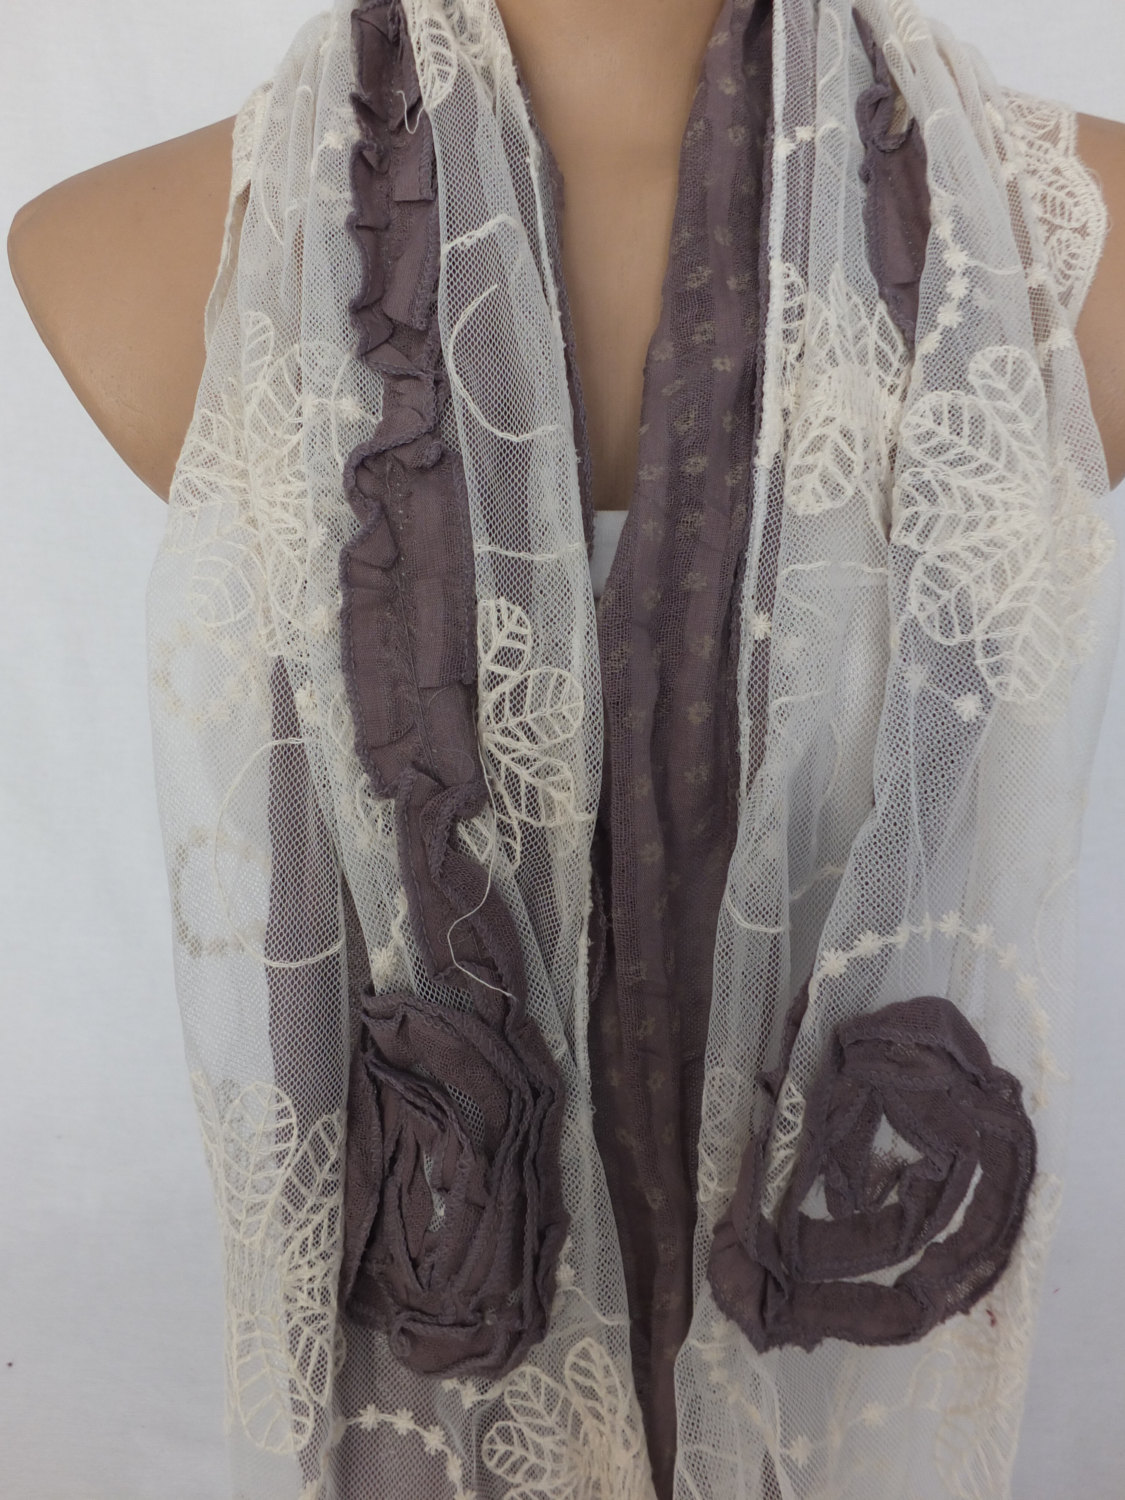 Gray Rose Scarf, Embroidery Tulle And Cotton Scarf, Shabby Chic Scarf, Womans Fashion Scarf, Long Scarf Shawl, Gift For Her